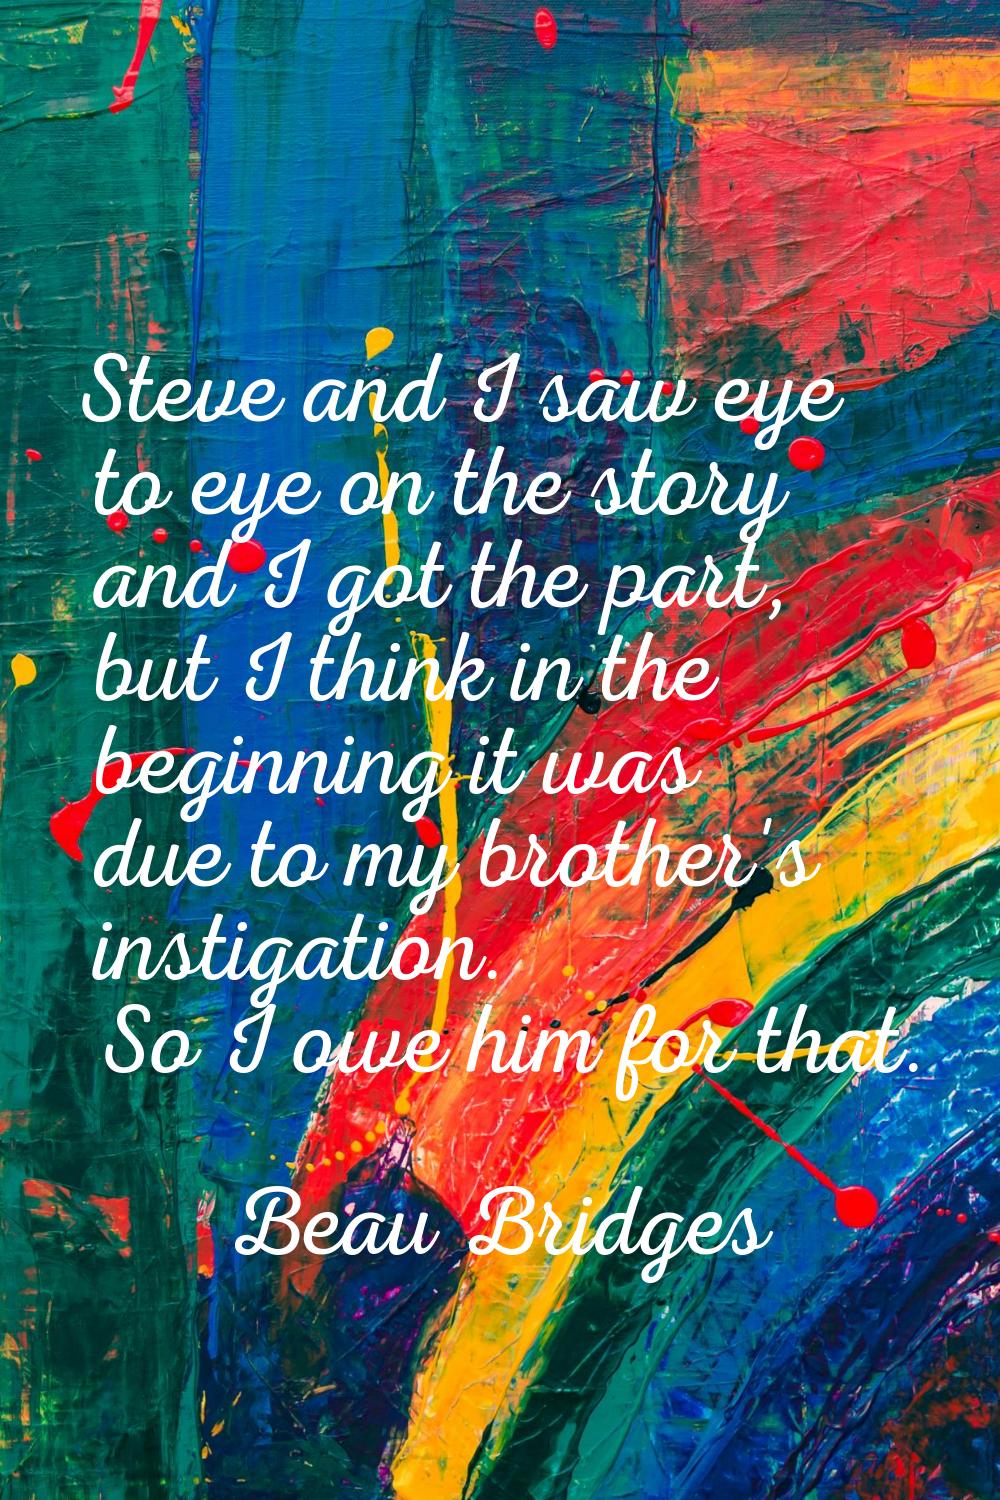 Steve and I saw eye to eye on the story and I got the part, but I think in the beginning it was due